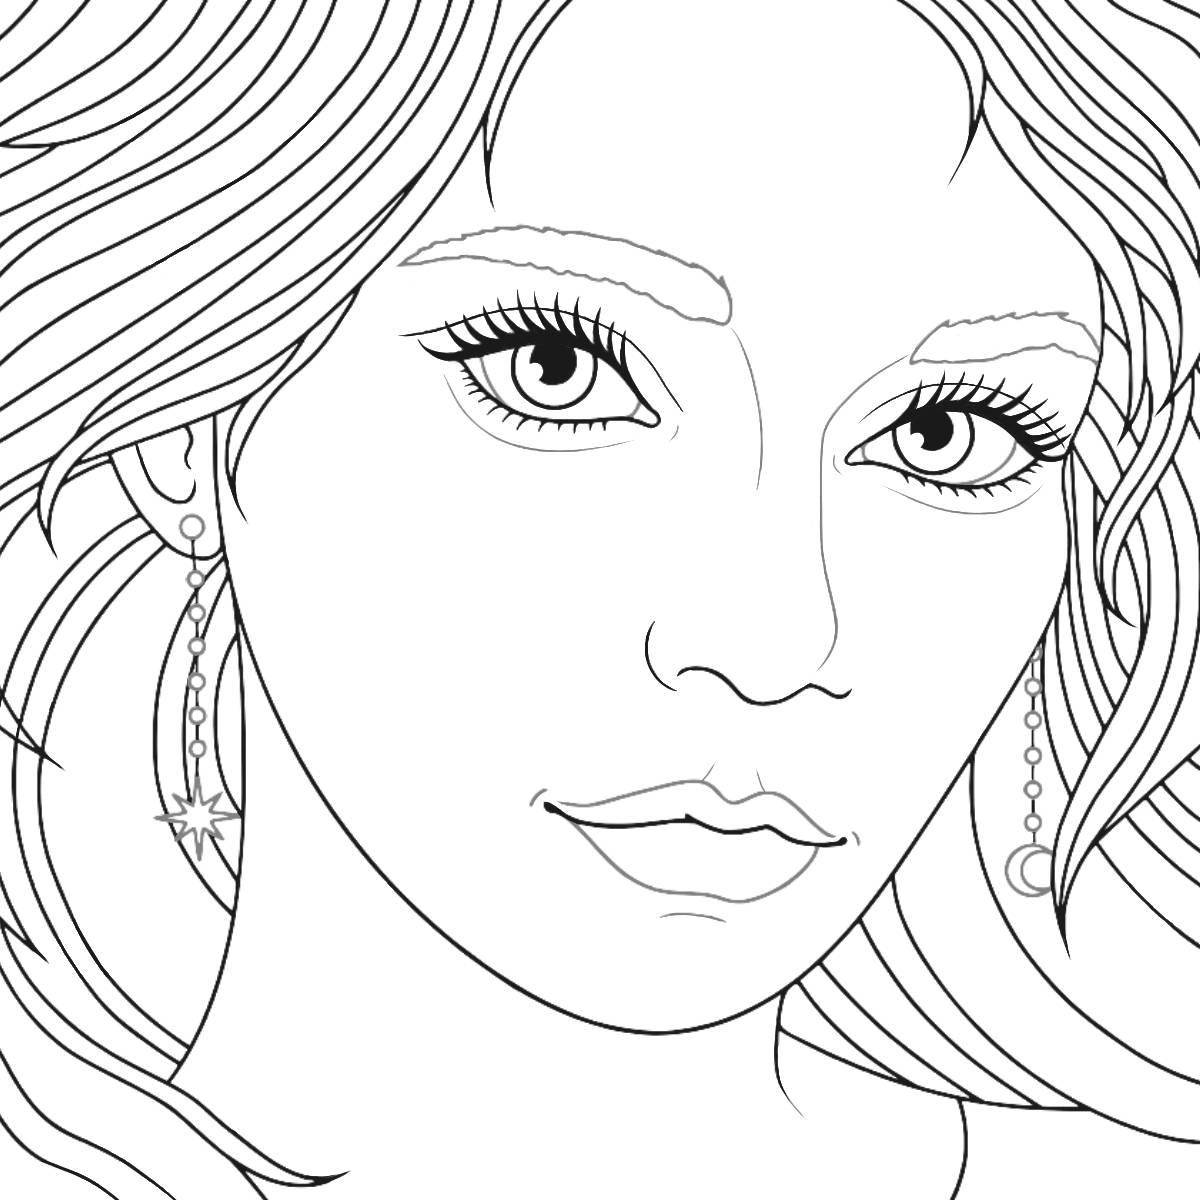 Fancy do-it-yourself makeup coloring book